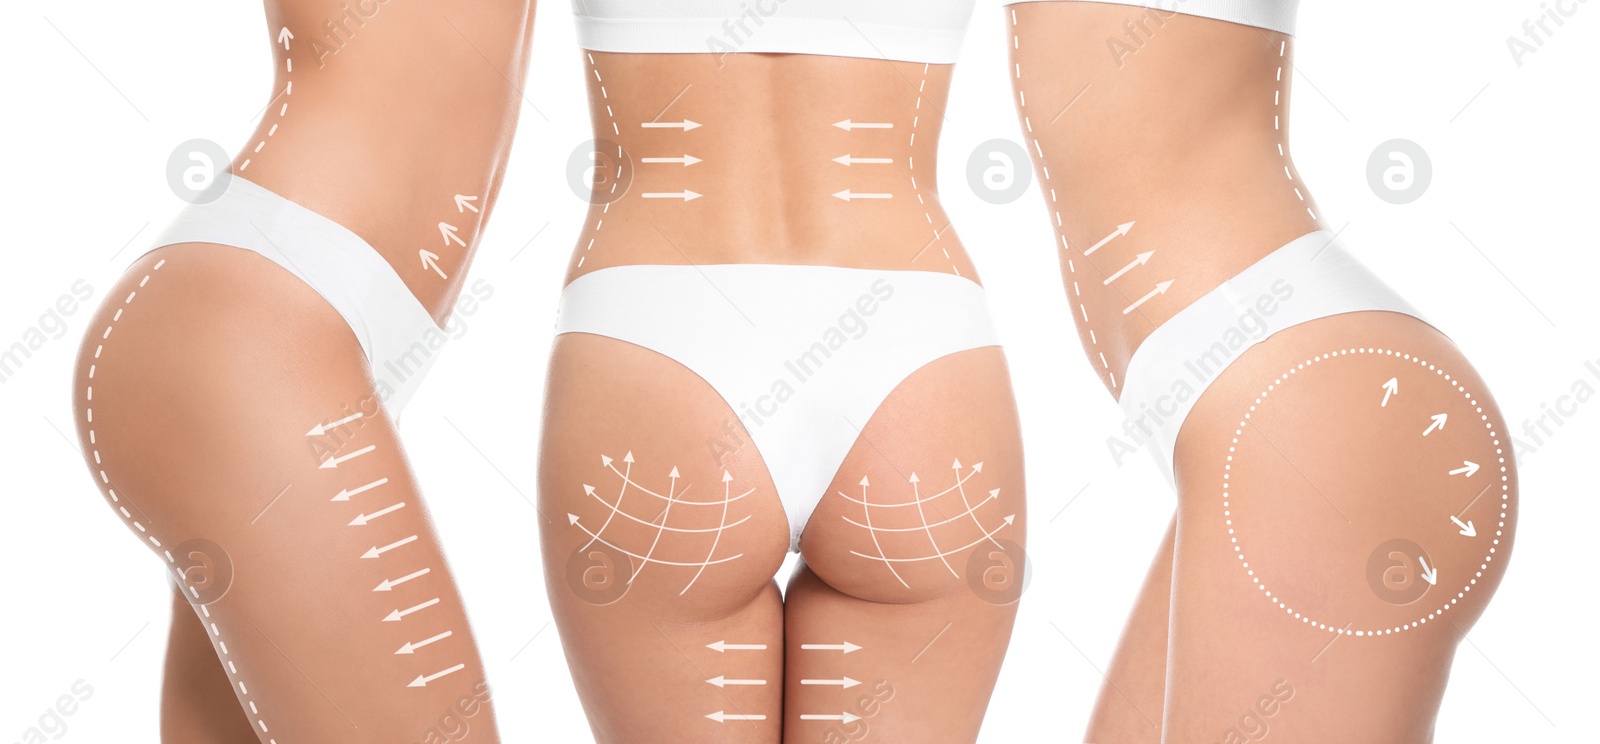 Image of Photos of young woman with marks on body against white background, collage. Cosmetic surgery concept